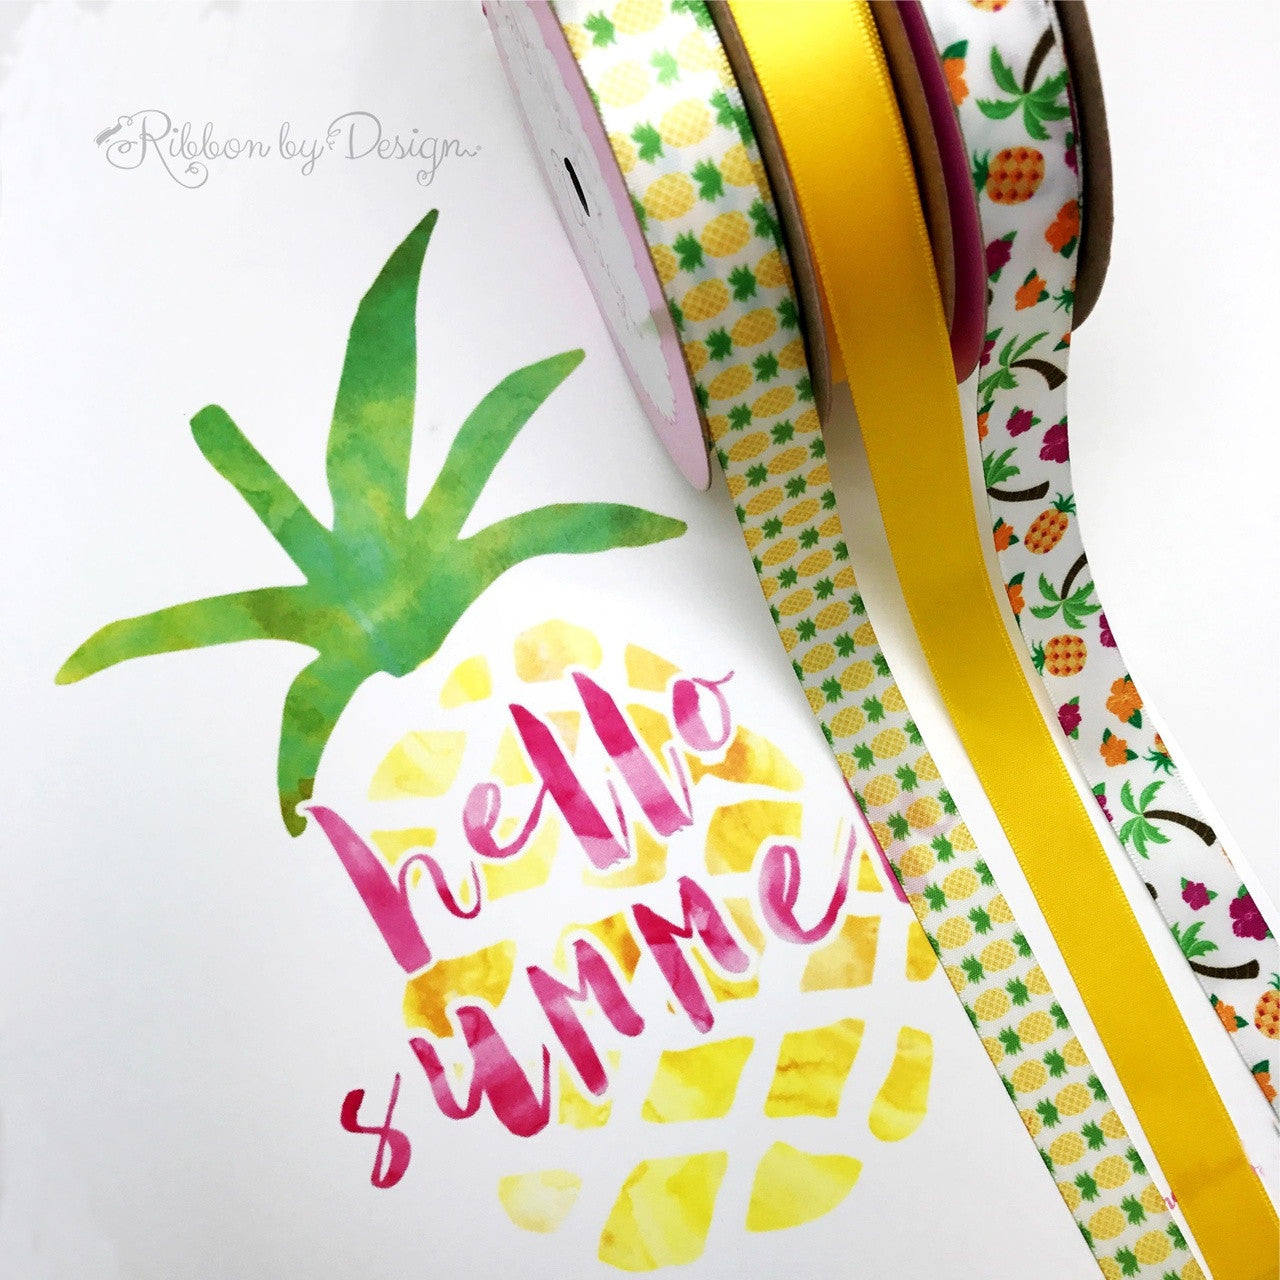 Pineapple Ribbon, Yellow and Green on 5/8" white single face satin